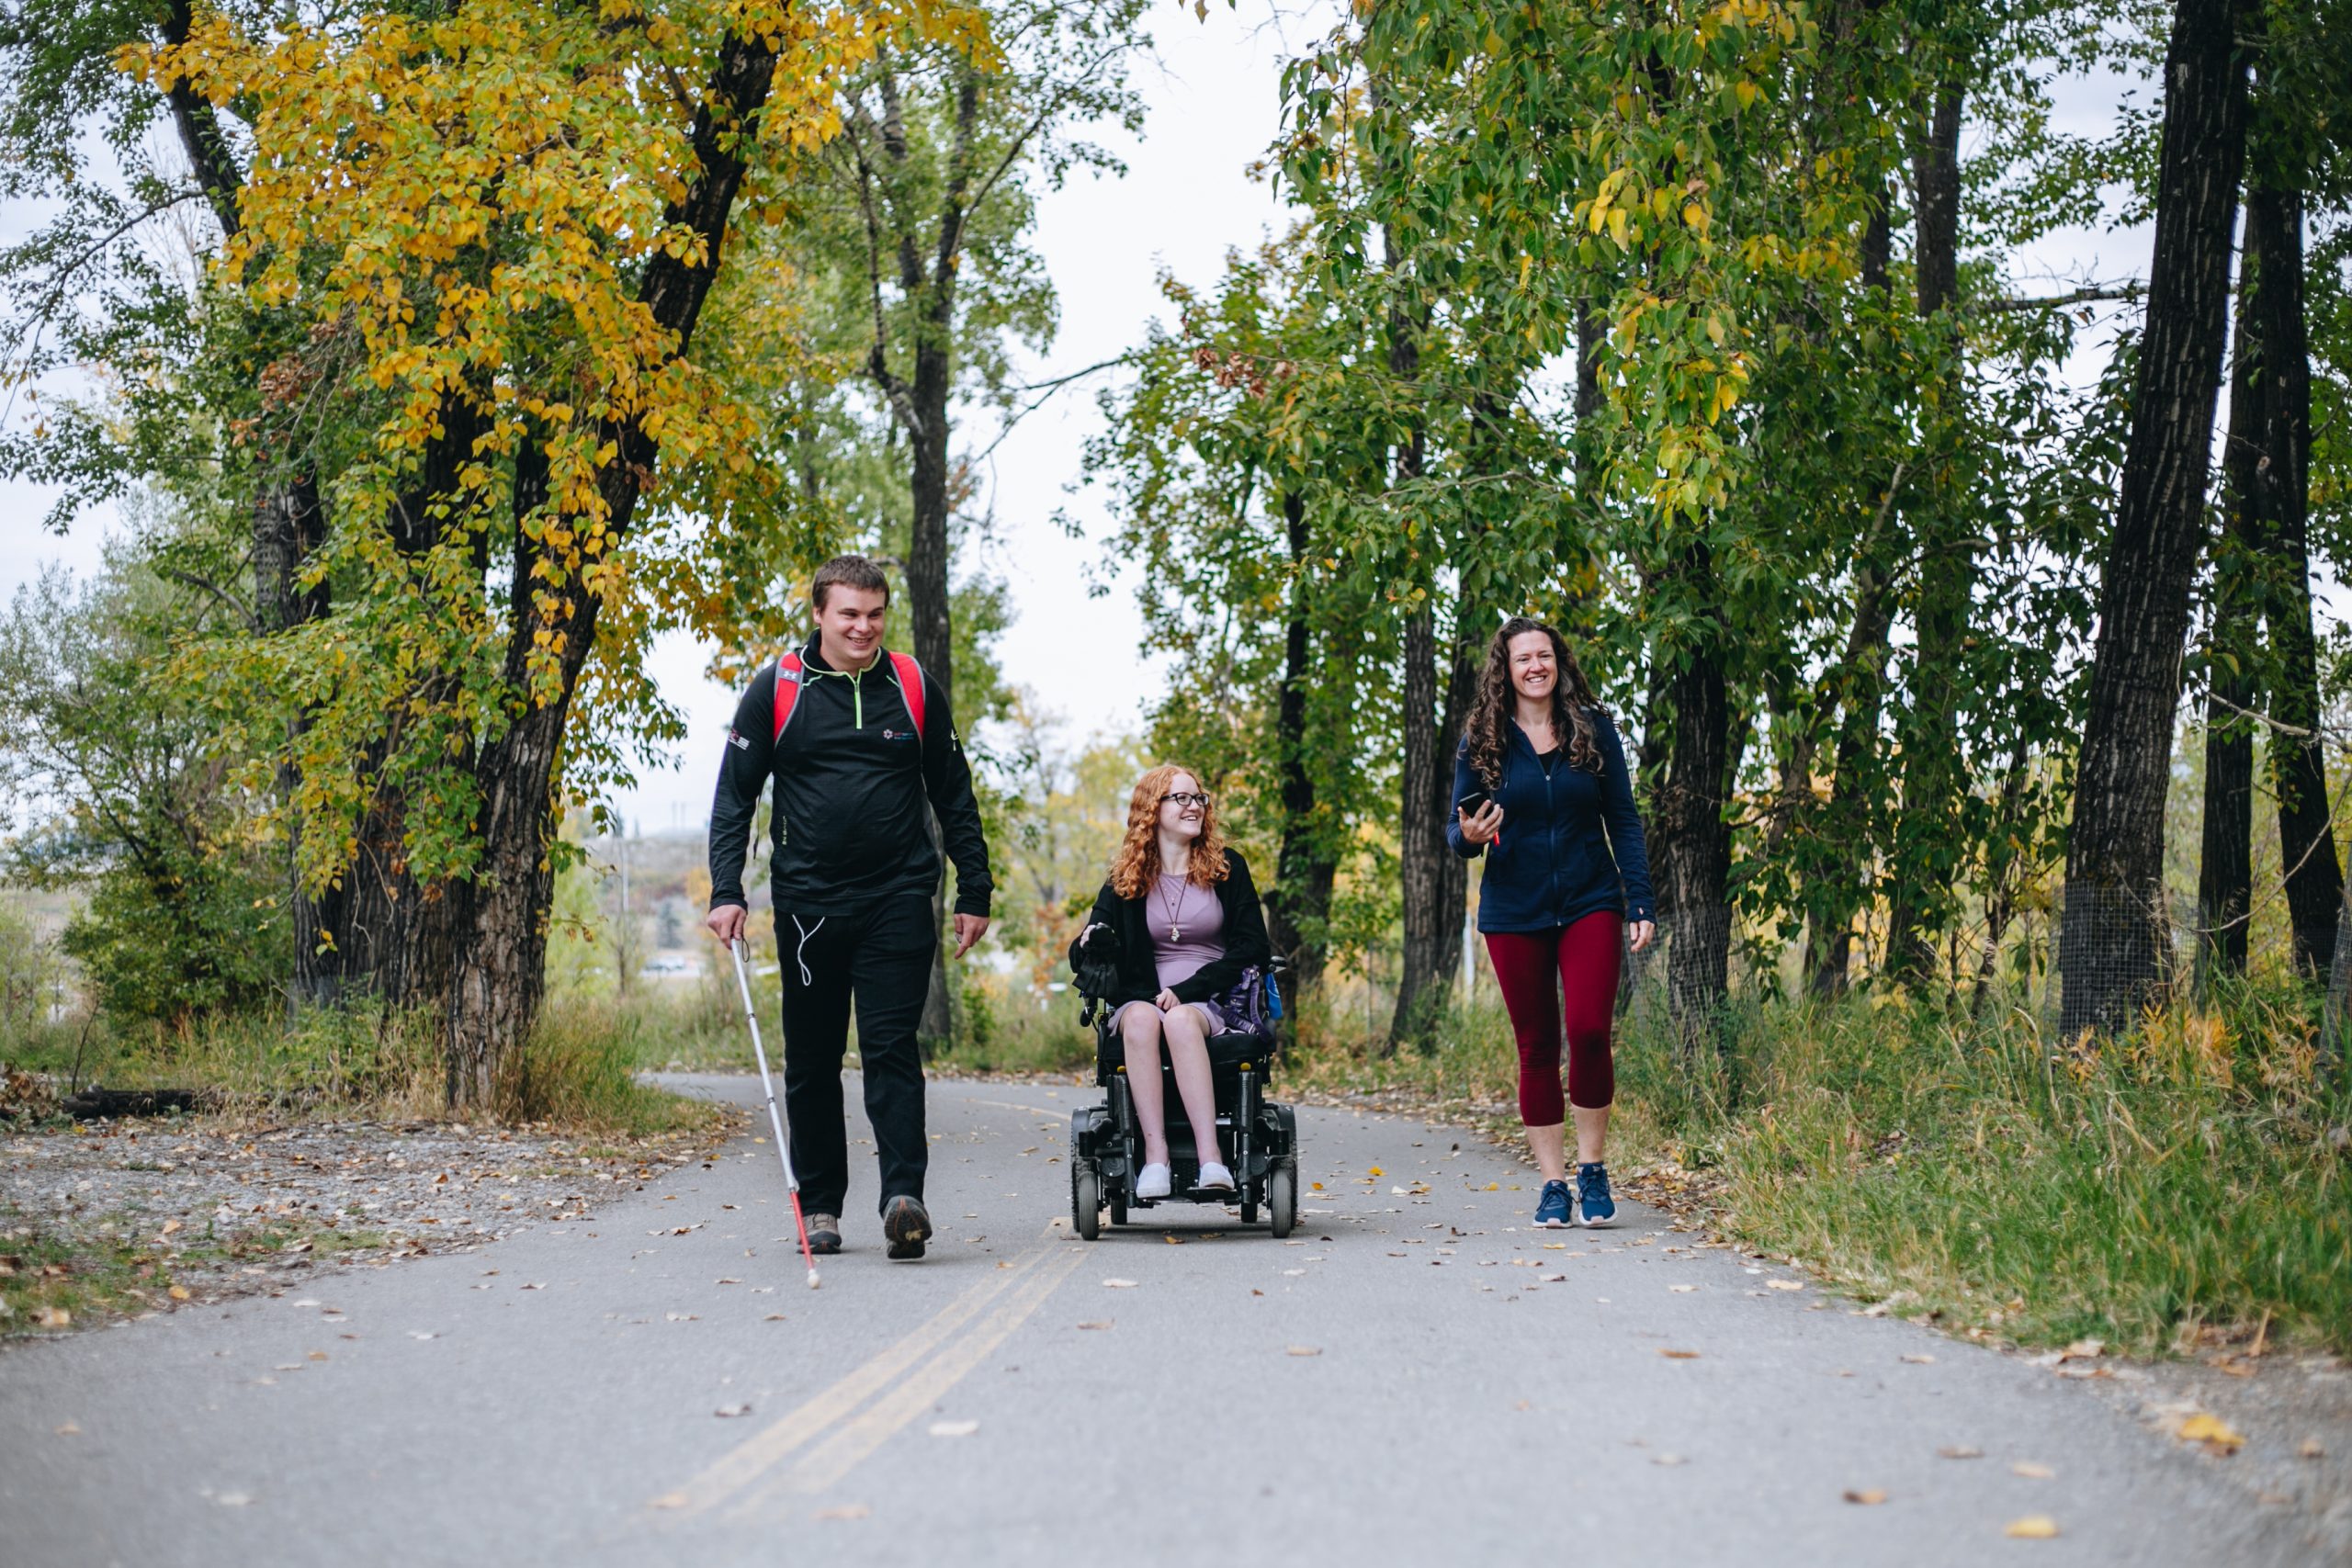 Accessibility mappers, a young blind man walking with a cane and a young girl sitting on a wheelchair, with their trail guide. They are walking on a paved path in a park on a beautiful autumn day.